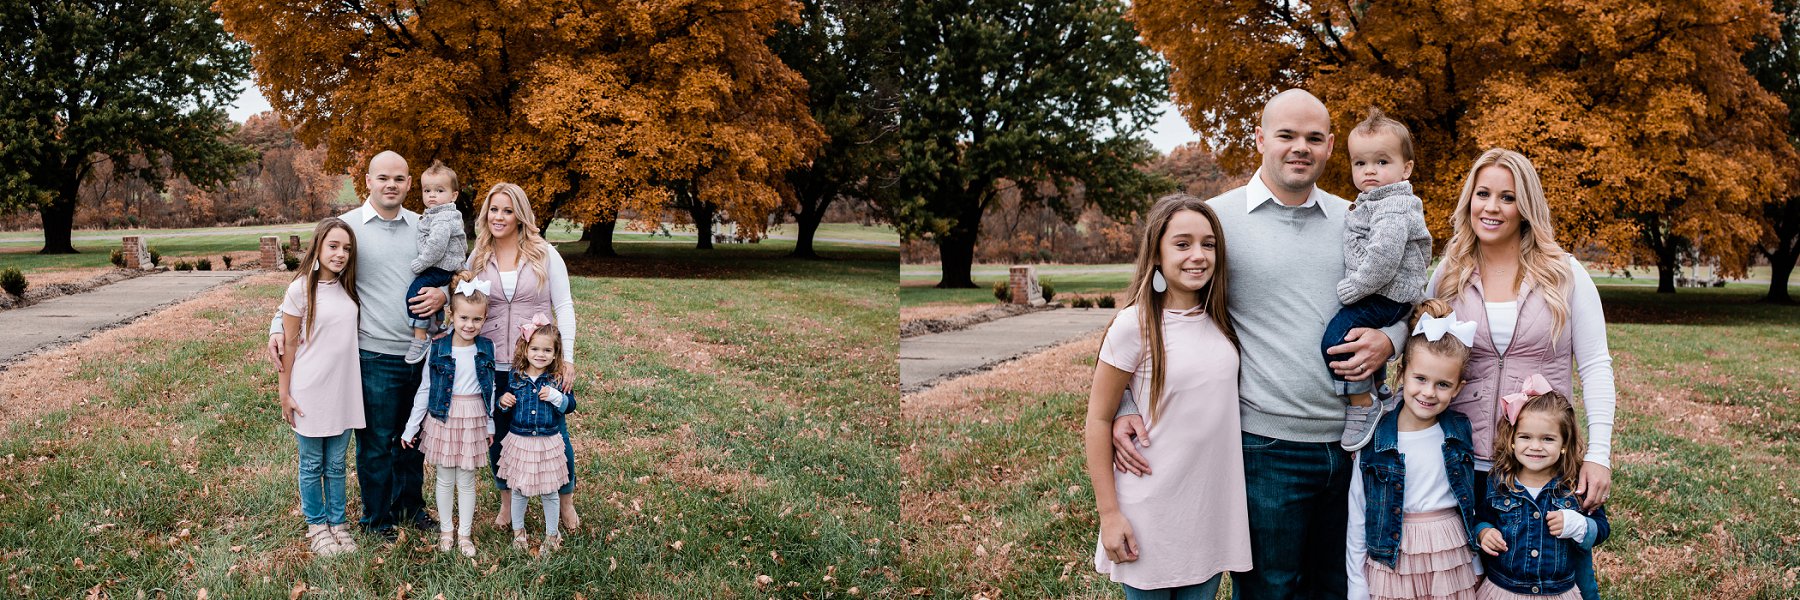 Fall Family Photography at Belvoir WInery by Family Photographer in Kansas City, Merry Ohler (2)